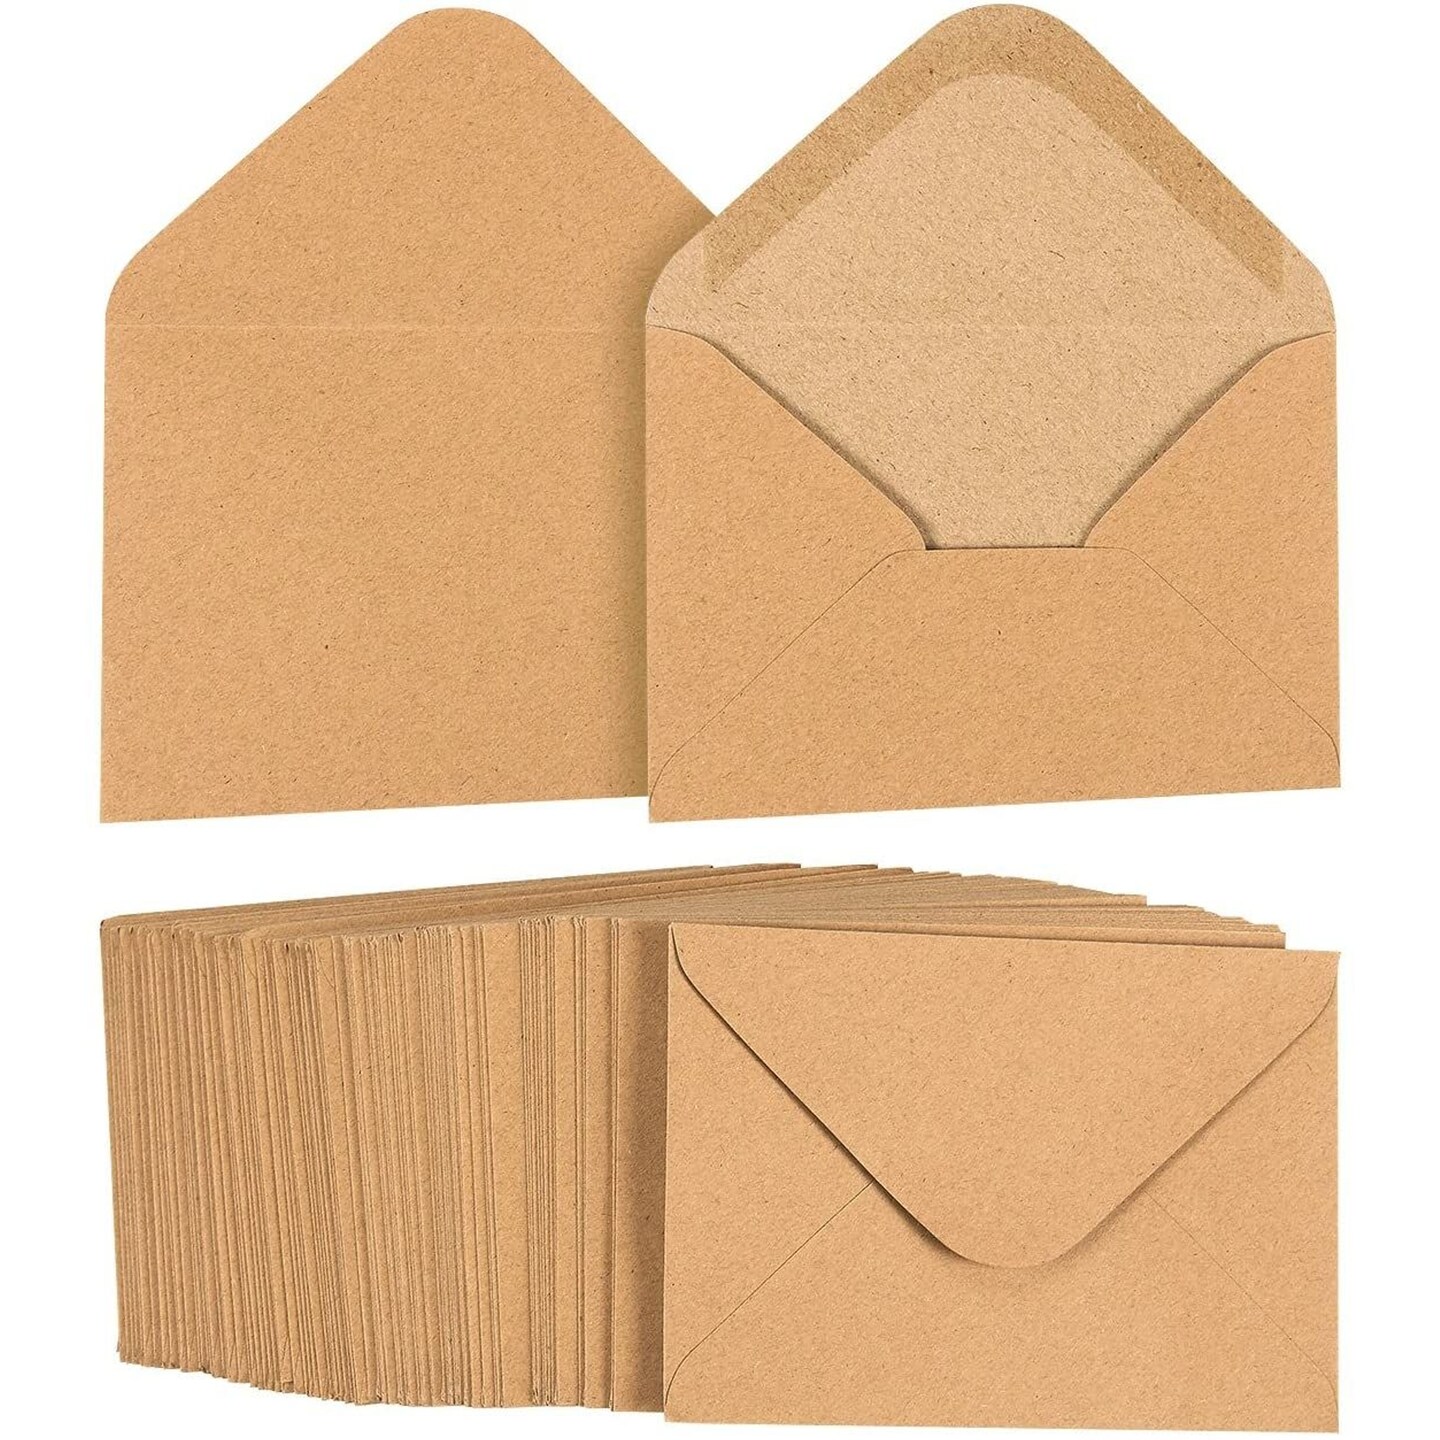 50 Pack Printable A7 Brown Envelopes for 5x7 Cards, Wedding Invitations,  Birthday, Graduation, Self-Adhesive Flap for Mailing (5.25 x 7.25 In)